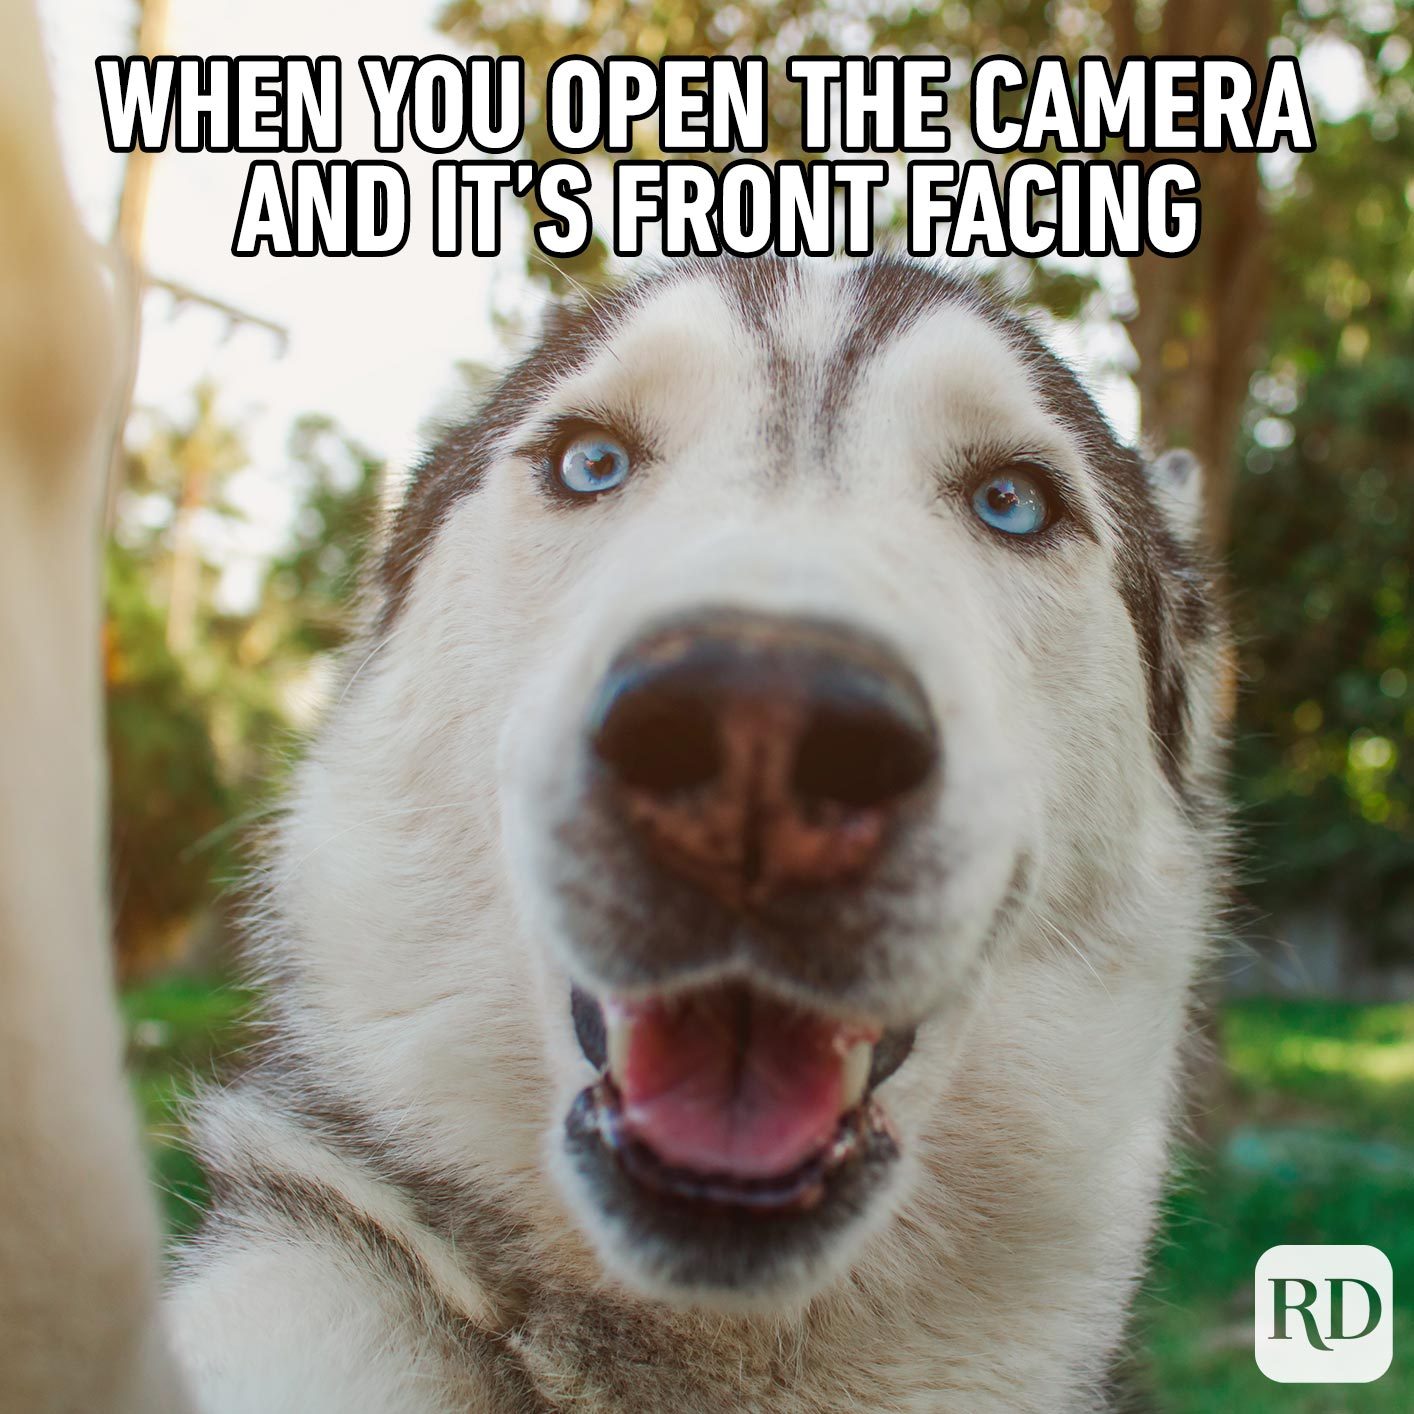 Dog getting close to camera. Meme text: When you open the camera and it's front facing